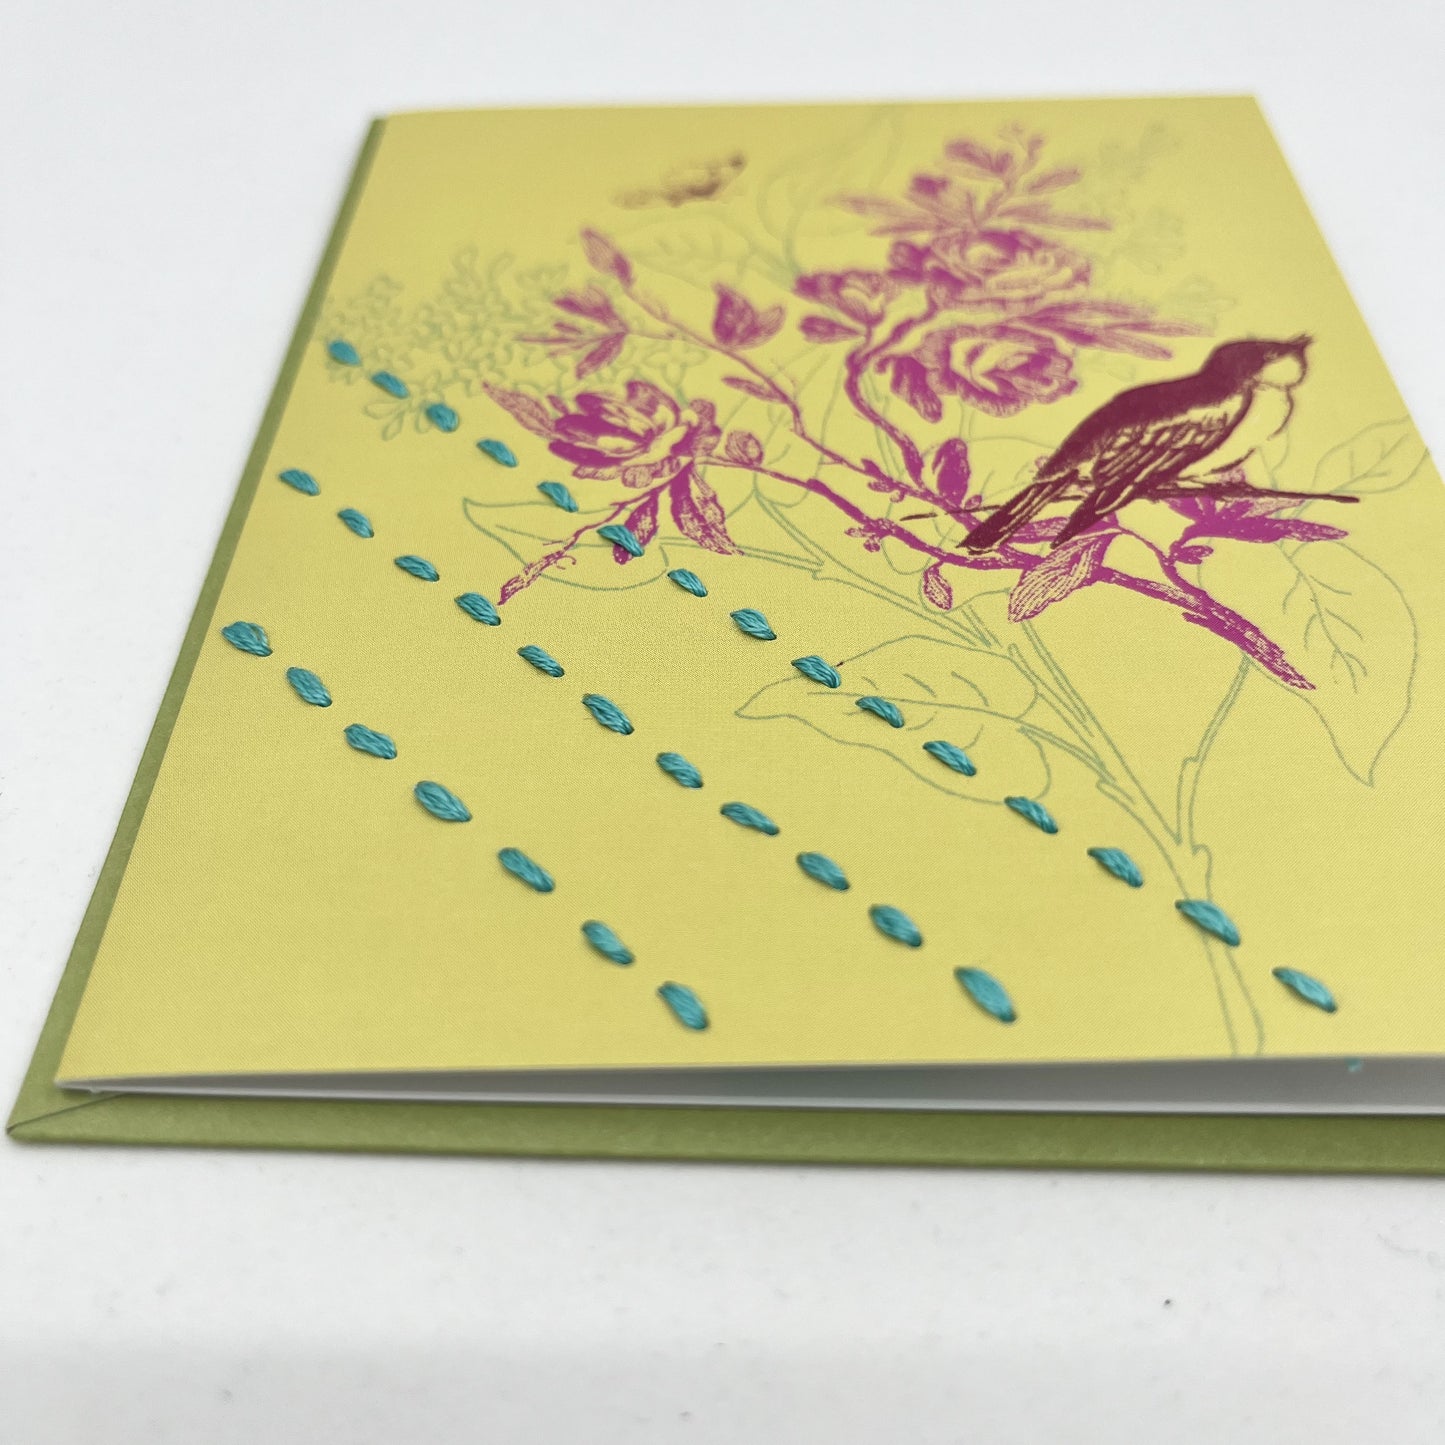 close up angled view of a chartreuse greeting card with a sparrow and flowers printed on it in brick red and fuchsia, hand stitched over with 3 rows of running stitches in blue, diagonally over the bottom left corner